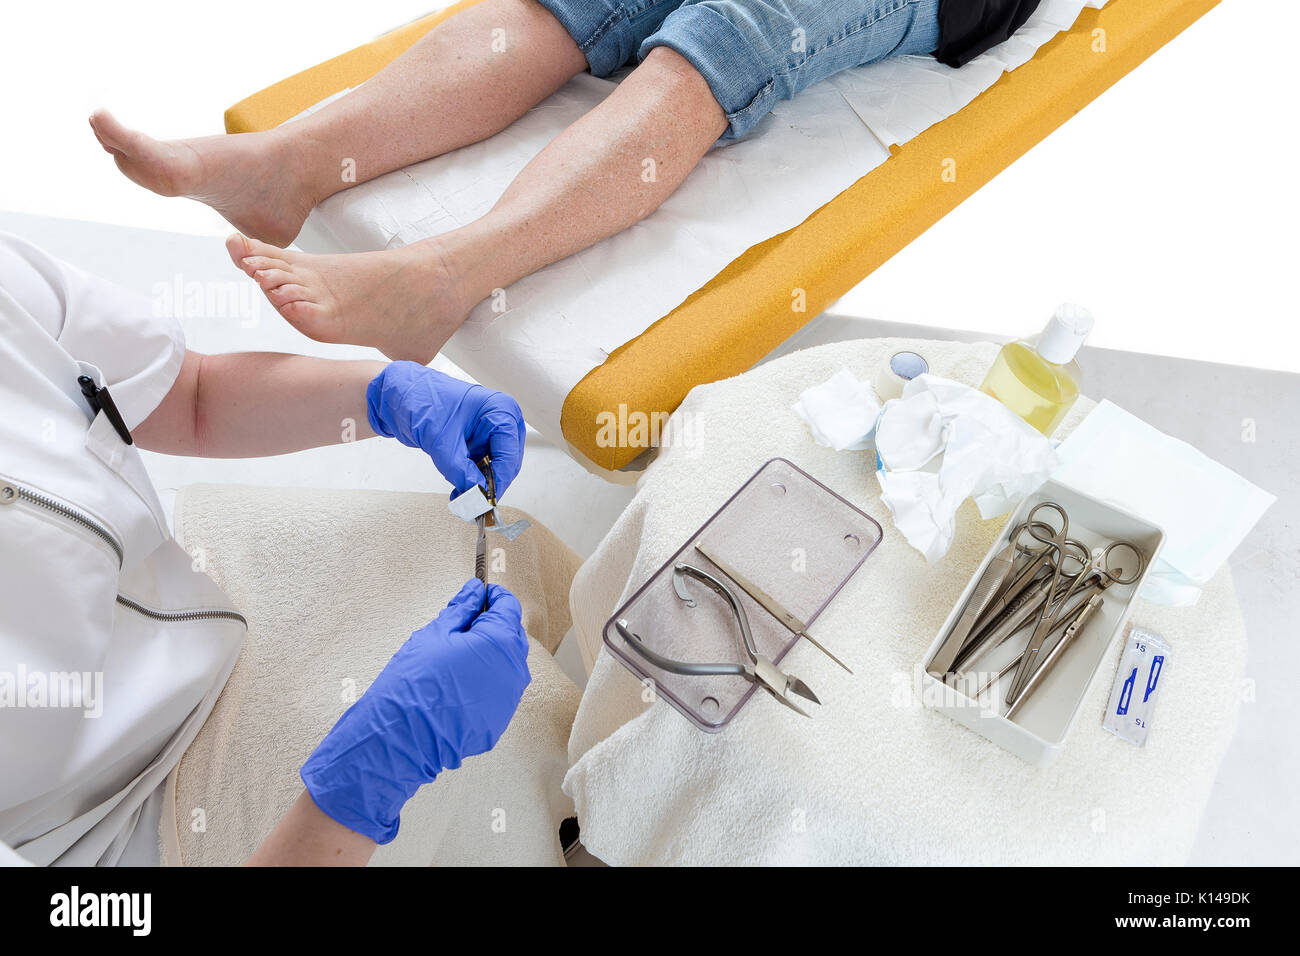 pedicurist cleaning and preparing professional instruments before doing pedicure Stock Photo